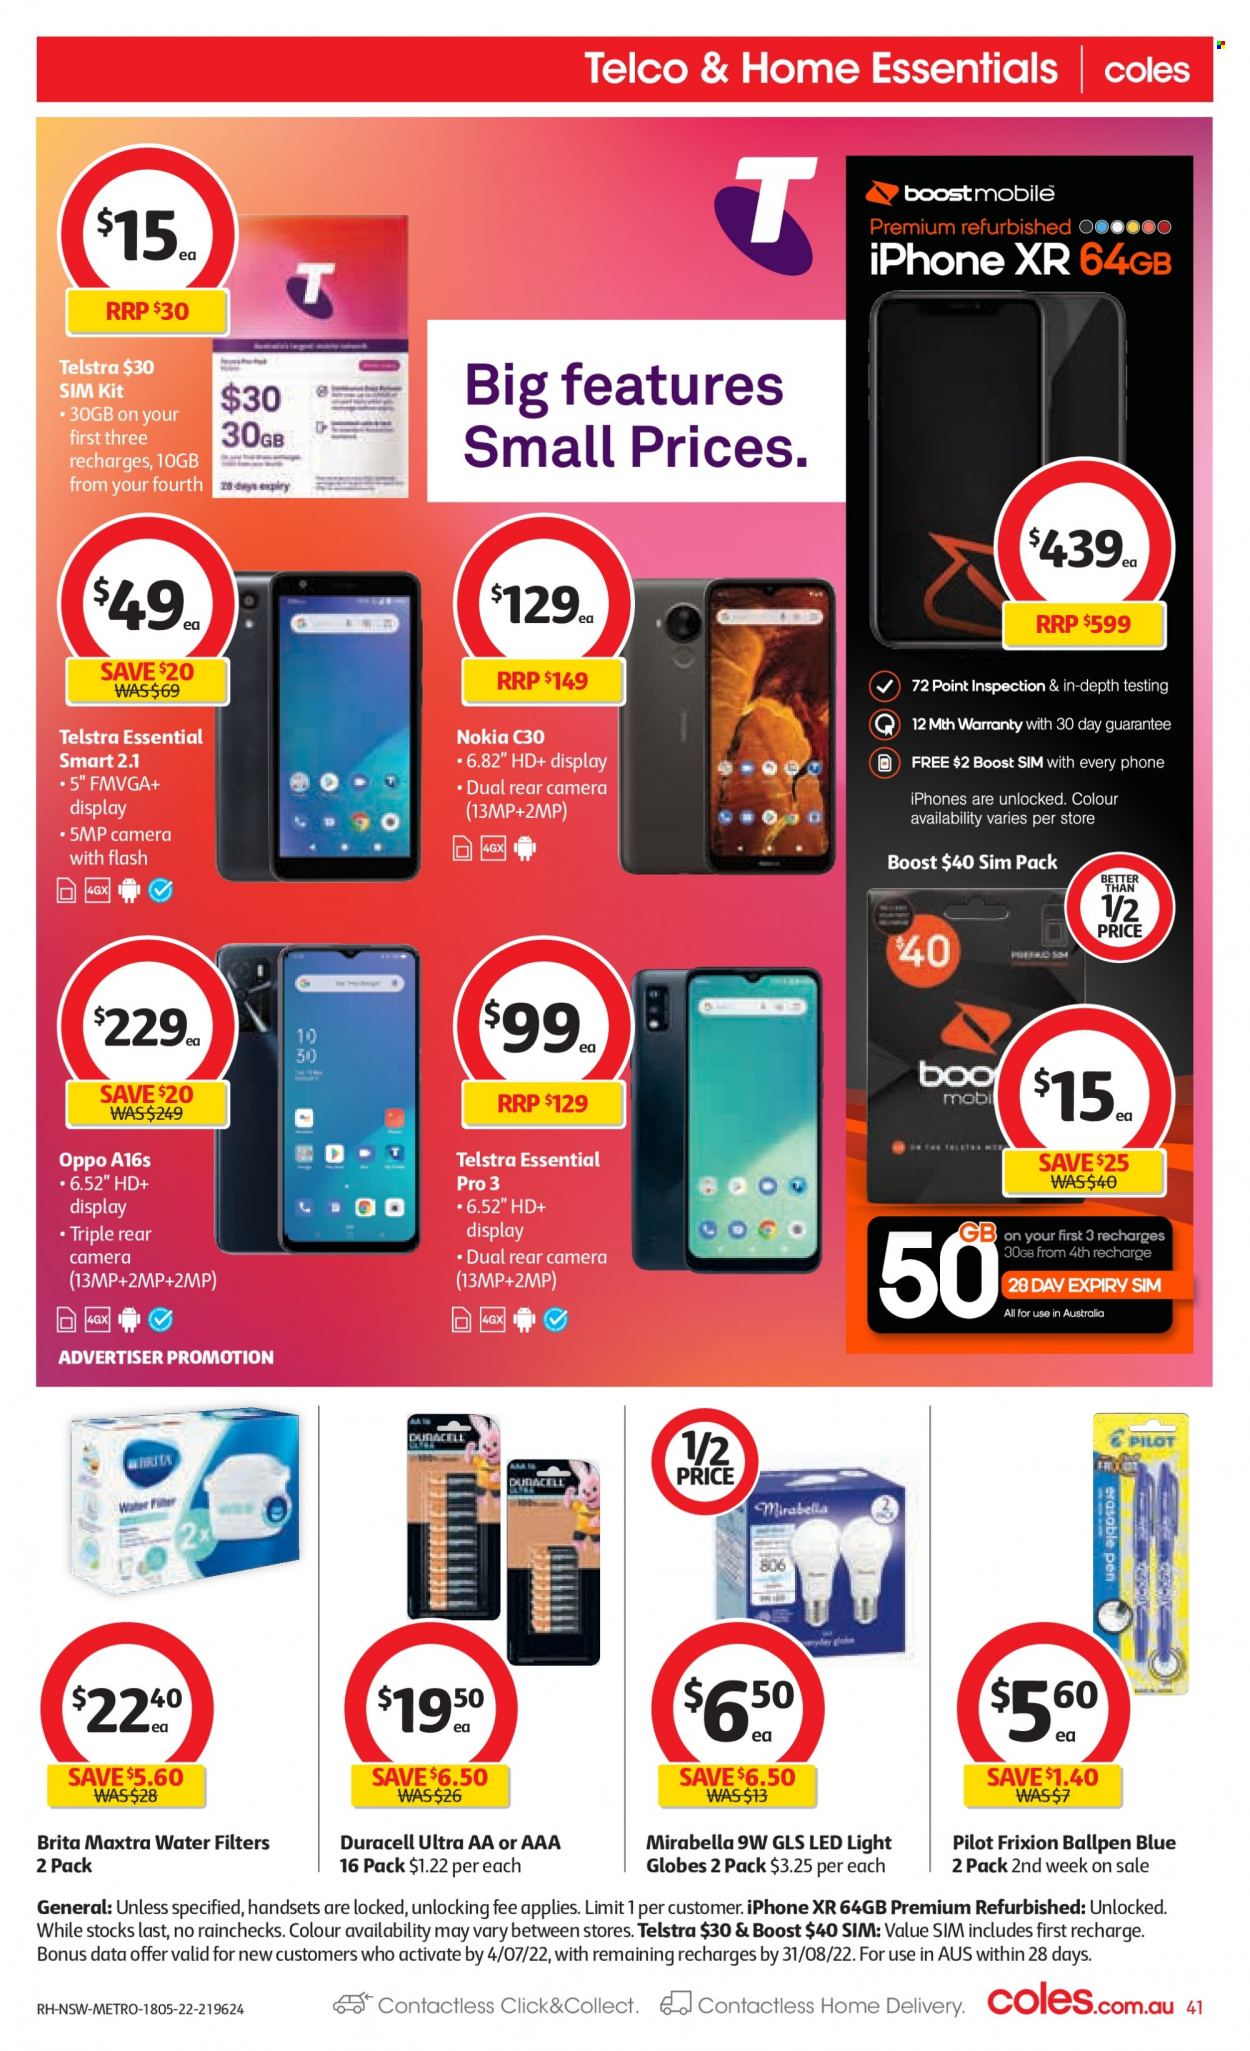 thumbnail - Coles Catalogue - 18 May 2022 - 24 May 2022 - Sales products - Boost, Pilot, Duracell, LED light. Page 41.